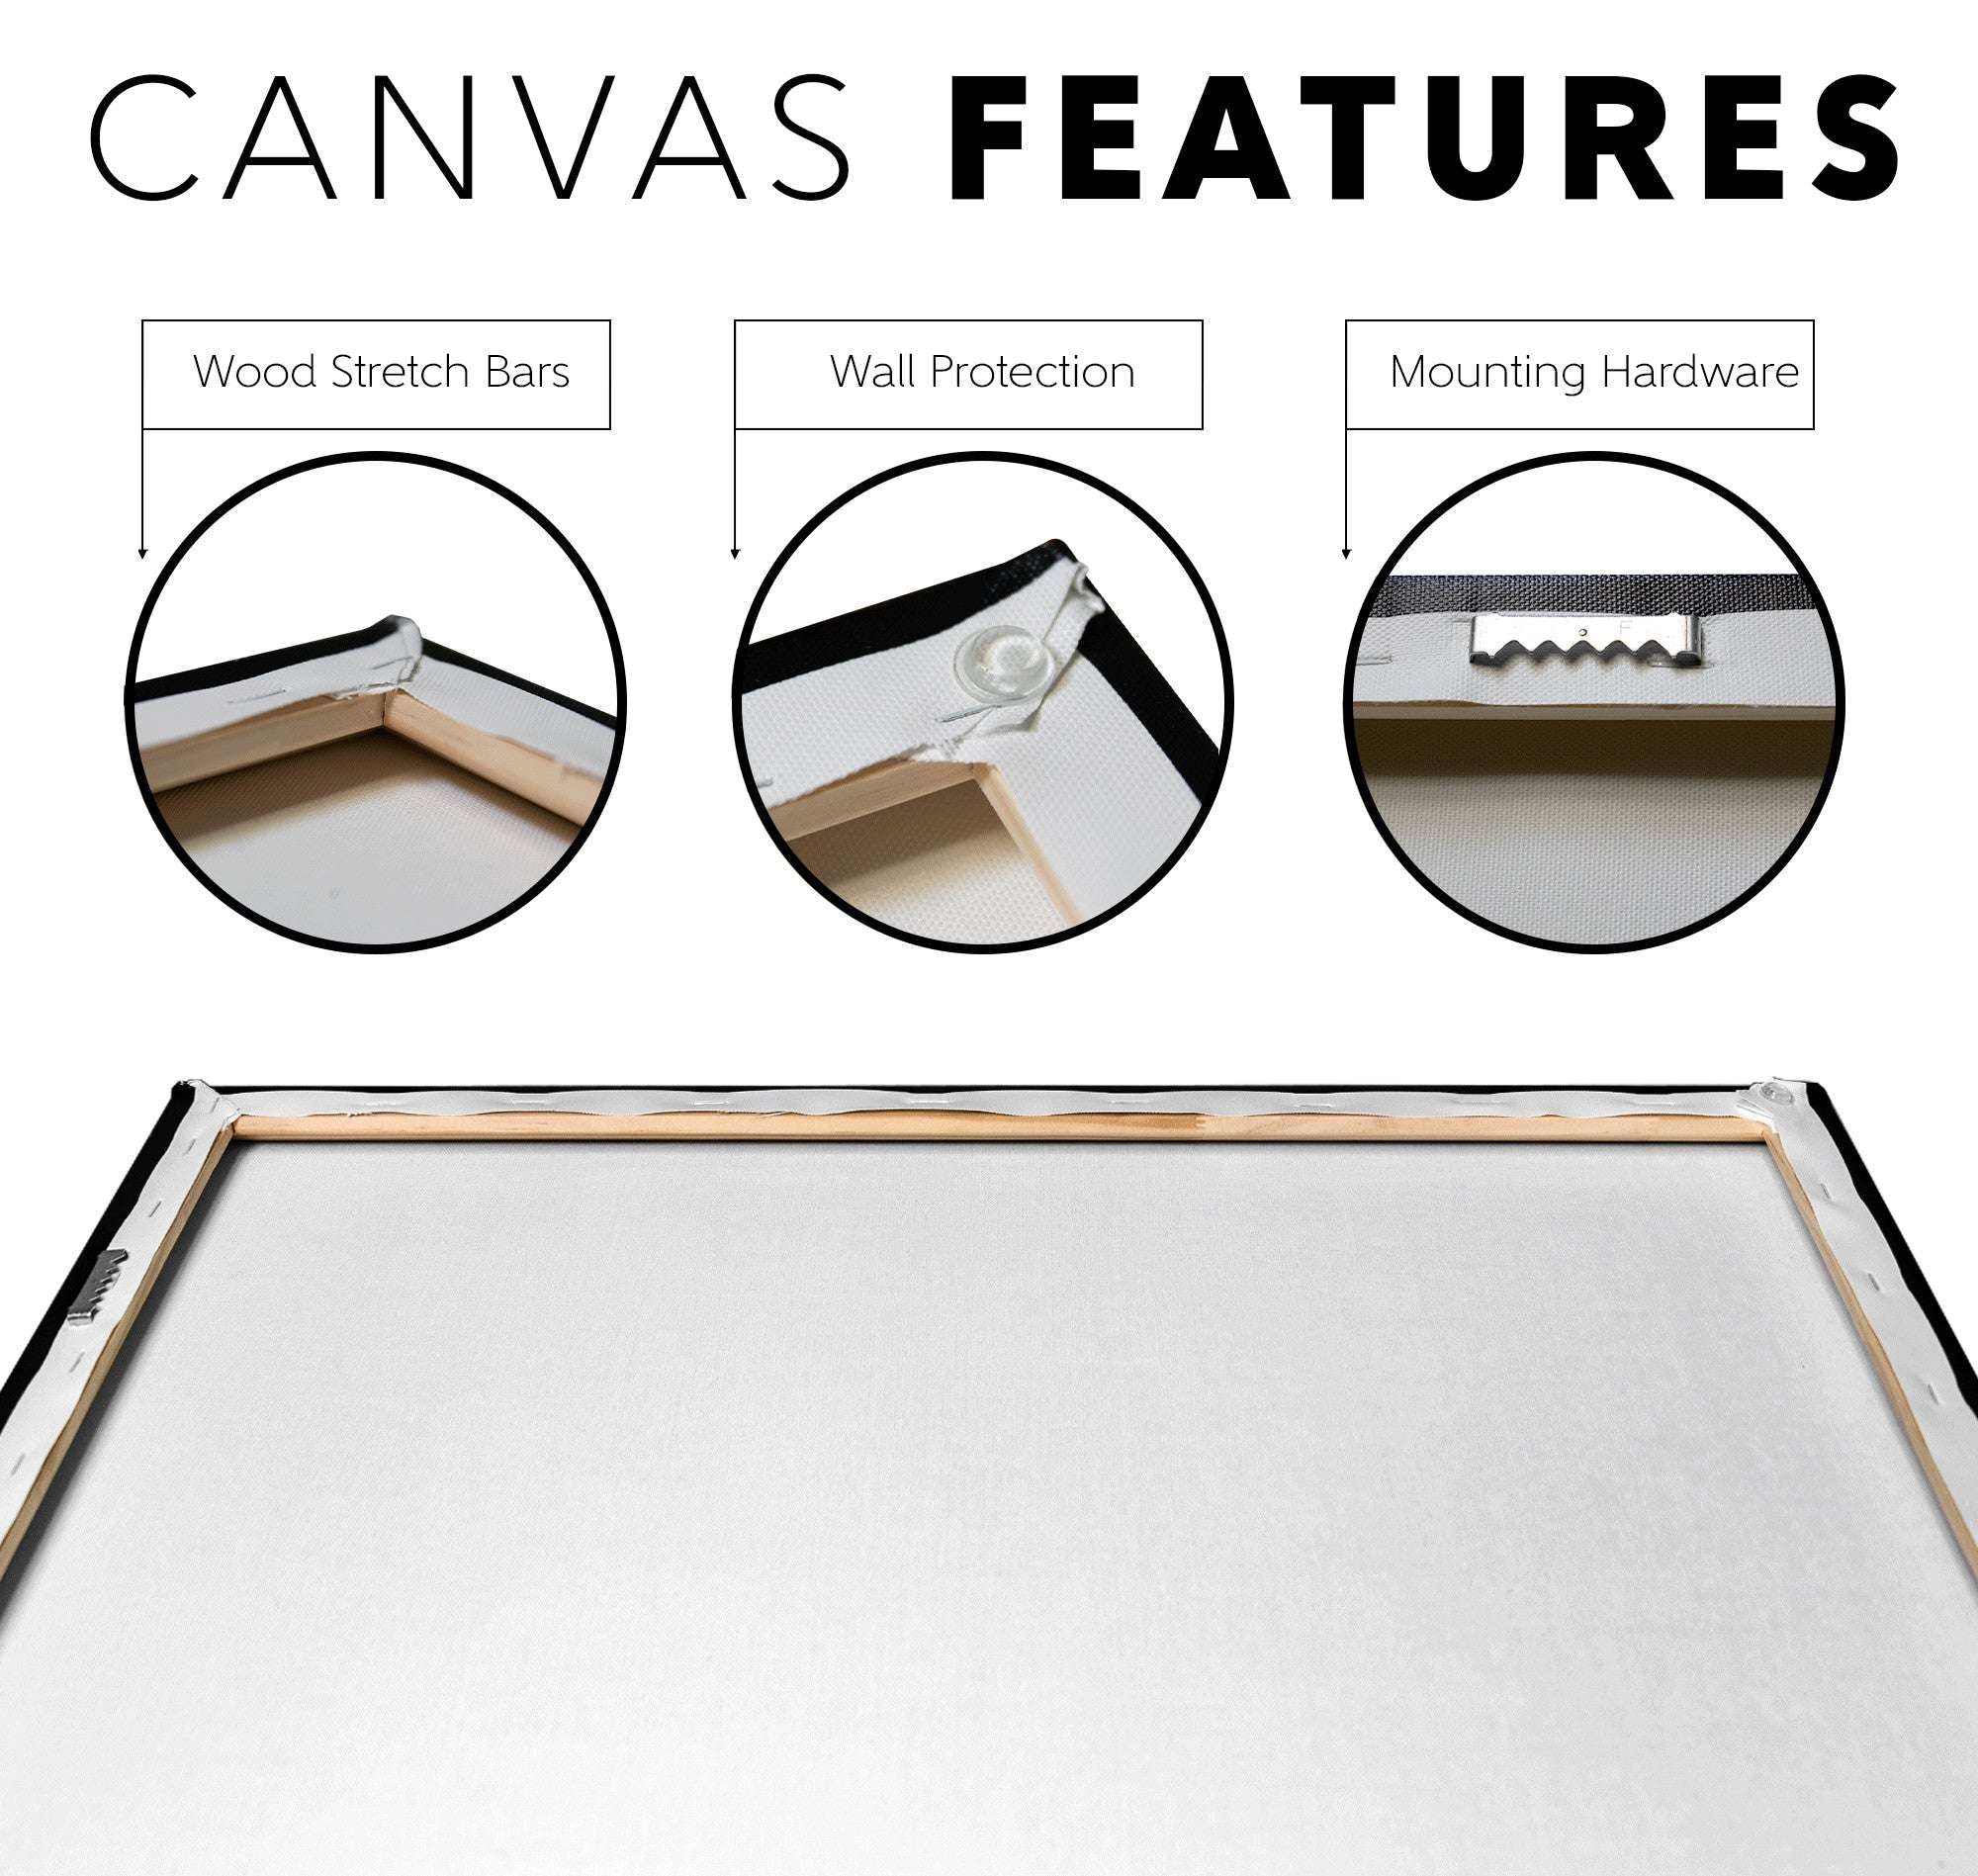 Illustration highlighting features of a Canvas Raccoon Print, including wood stretch bars, wall protection, and mounting hardware, with close-up insets and labels.